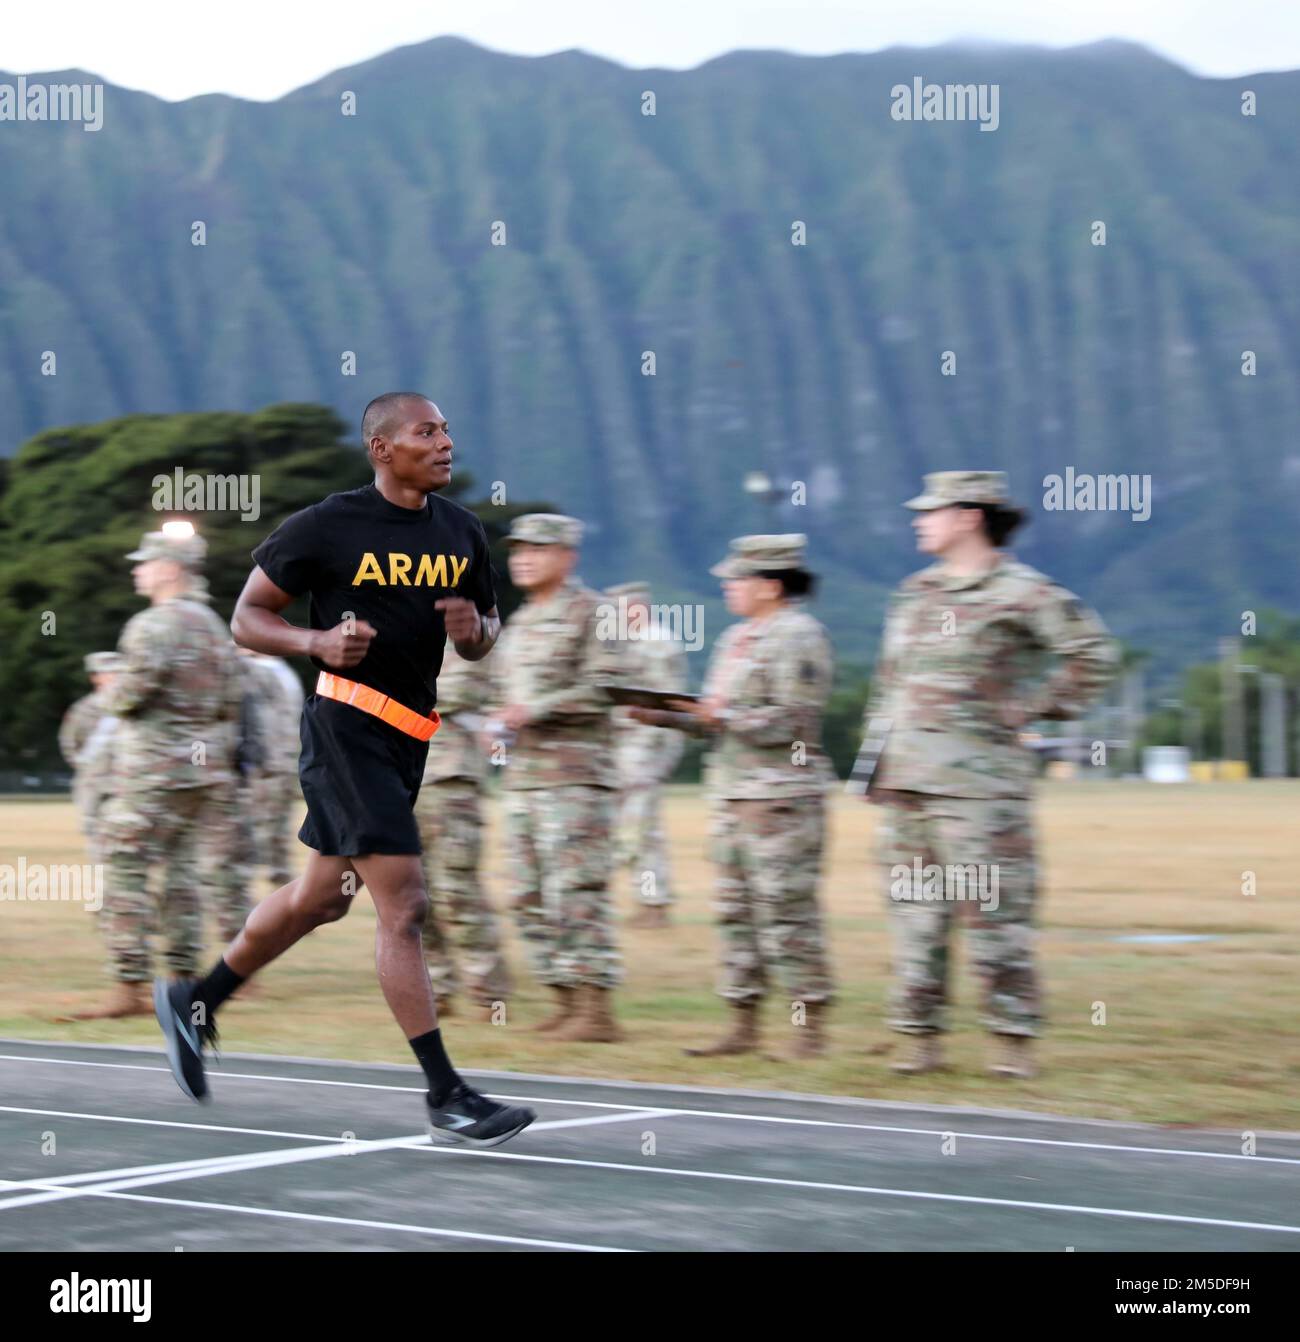 Hawaii Army National Guard (HIARNG) Soldier Spc. Kevin T. Brown, a mass communications specialist assigned to the 117th Mobile Public Affairs Detachment (MPAD), crosses the finish line during the annual Best Warrior Competition (BWC) Army Combat Fitness Test (ACFT) event at the Regional Training Institute (RTI), Waimanalo, Hawaii, March 4, 2022. The BWC is an annual three-day event that Soldiers and Non-Commissioned Officers (NCOs) of the HIARNG and Hawaii Army Reserve compete in to earn the title of 'Best Warrior'. The BWC tests Soldiers' individual ability to adapt and overcome challenging s Stock Photo